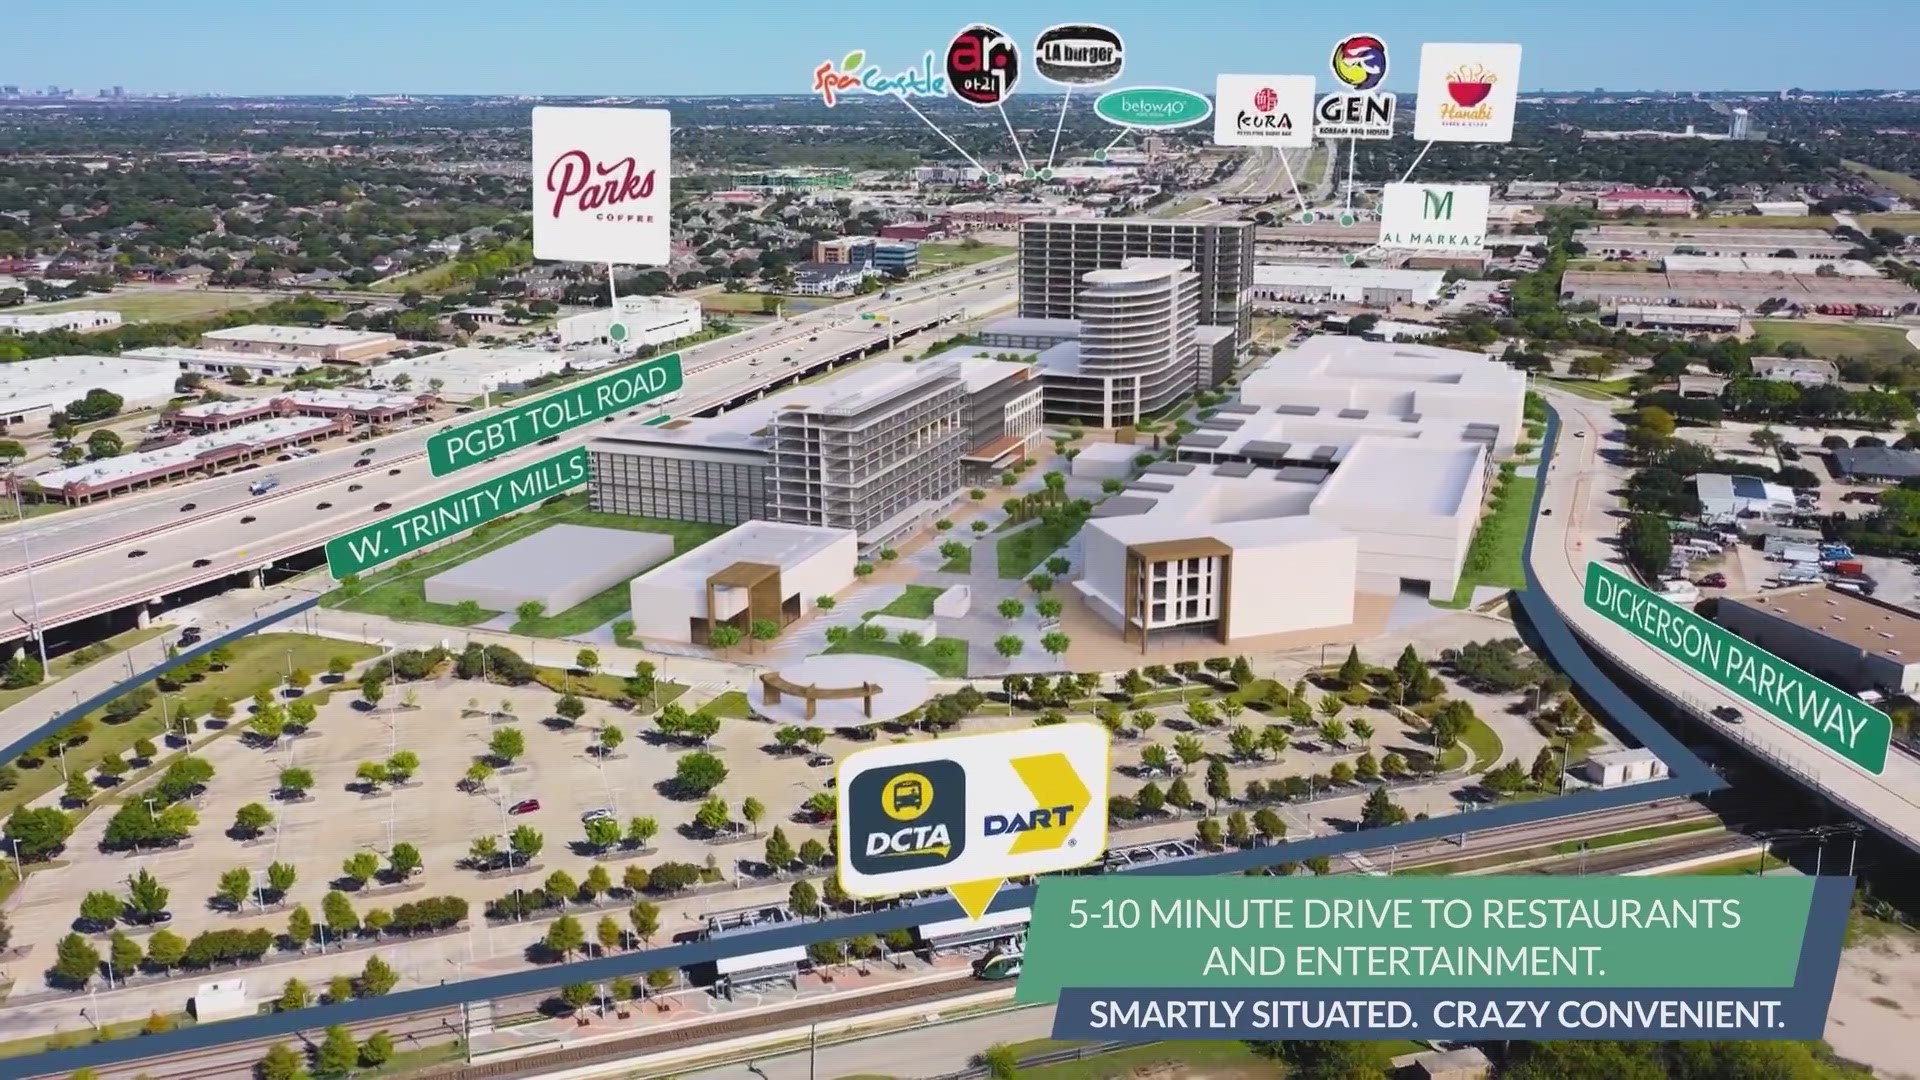 The multi-use project anchored at the Trinity Mills station at the President George Bush Turnpike and I-35 interchange will feature residential, retail, and more.